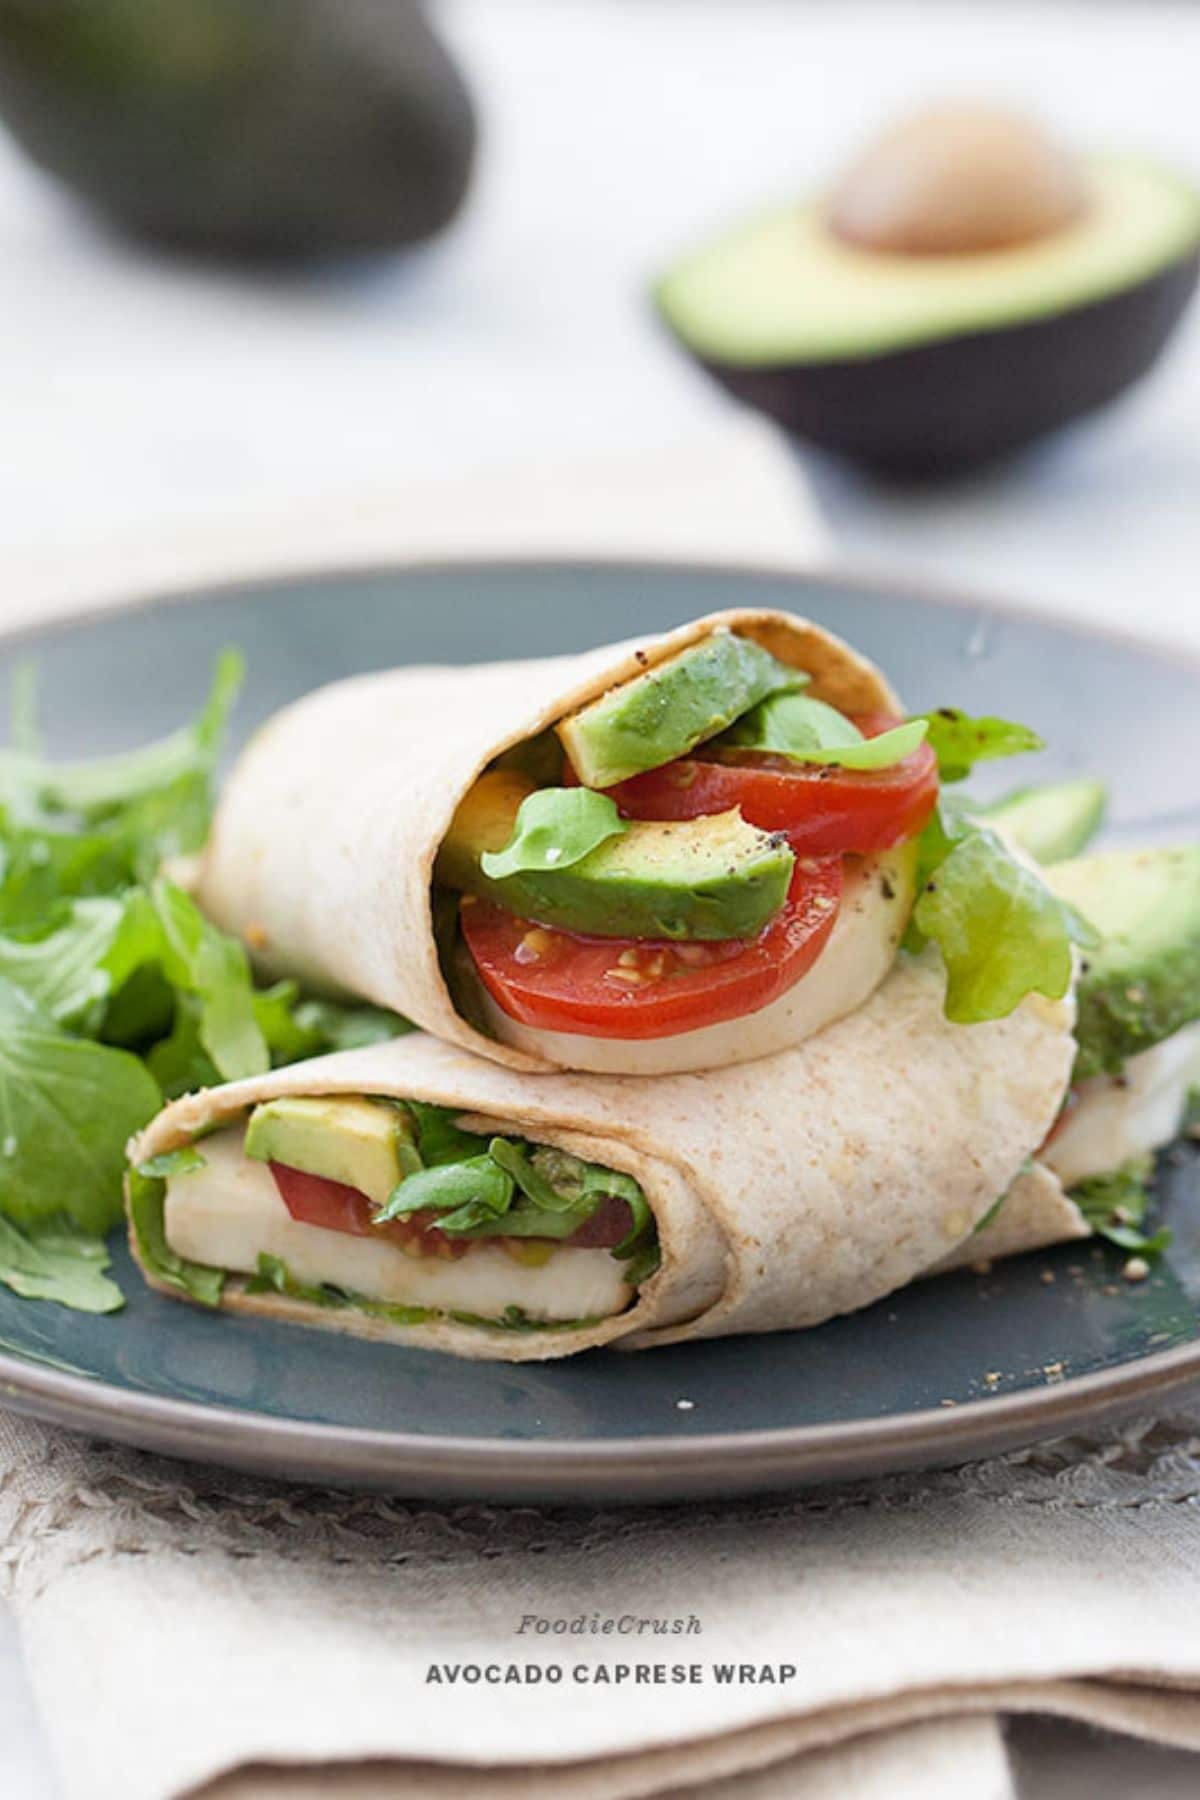 Tomato and avocado in wrap on gray plate